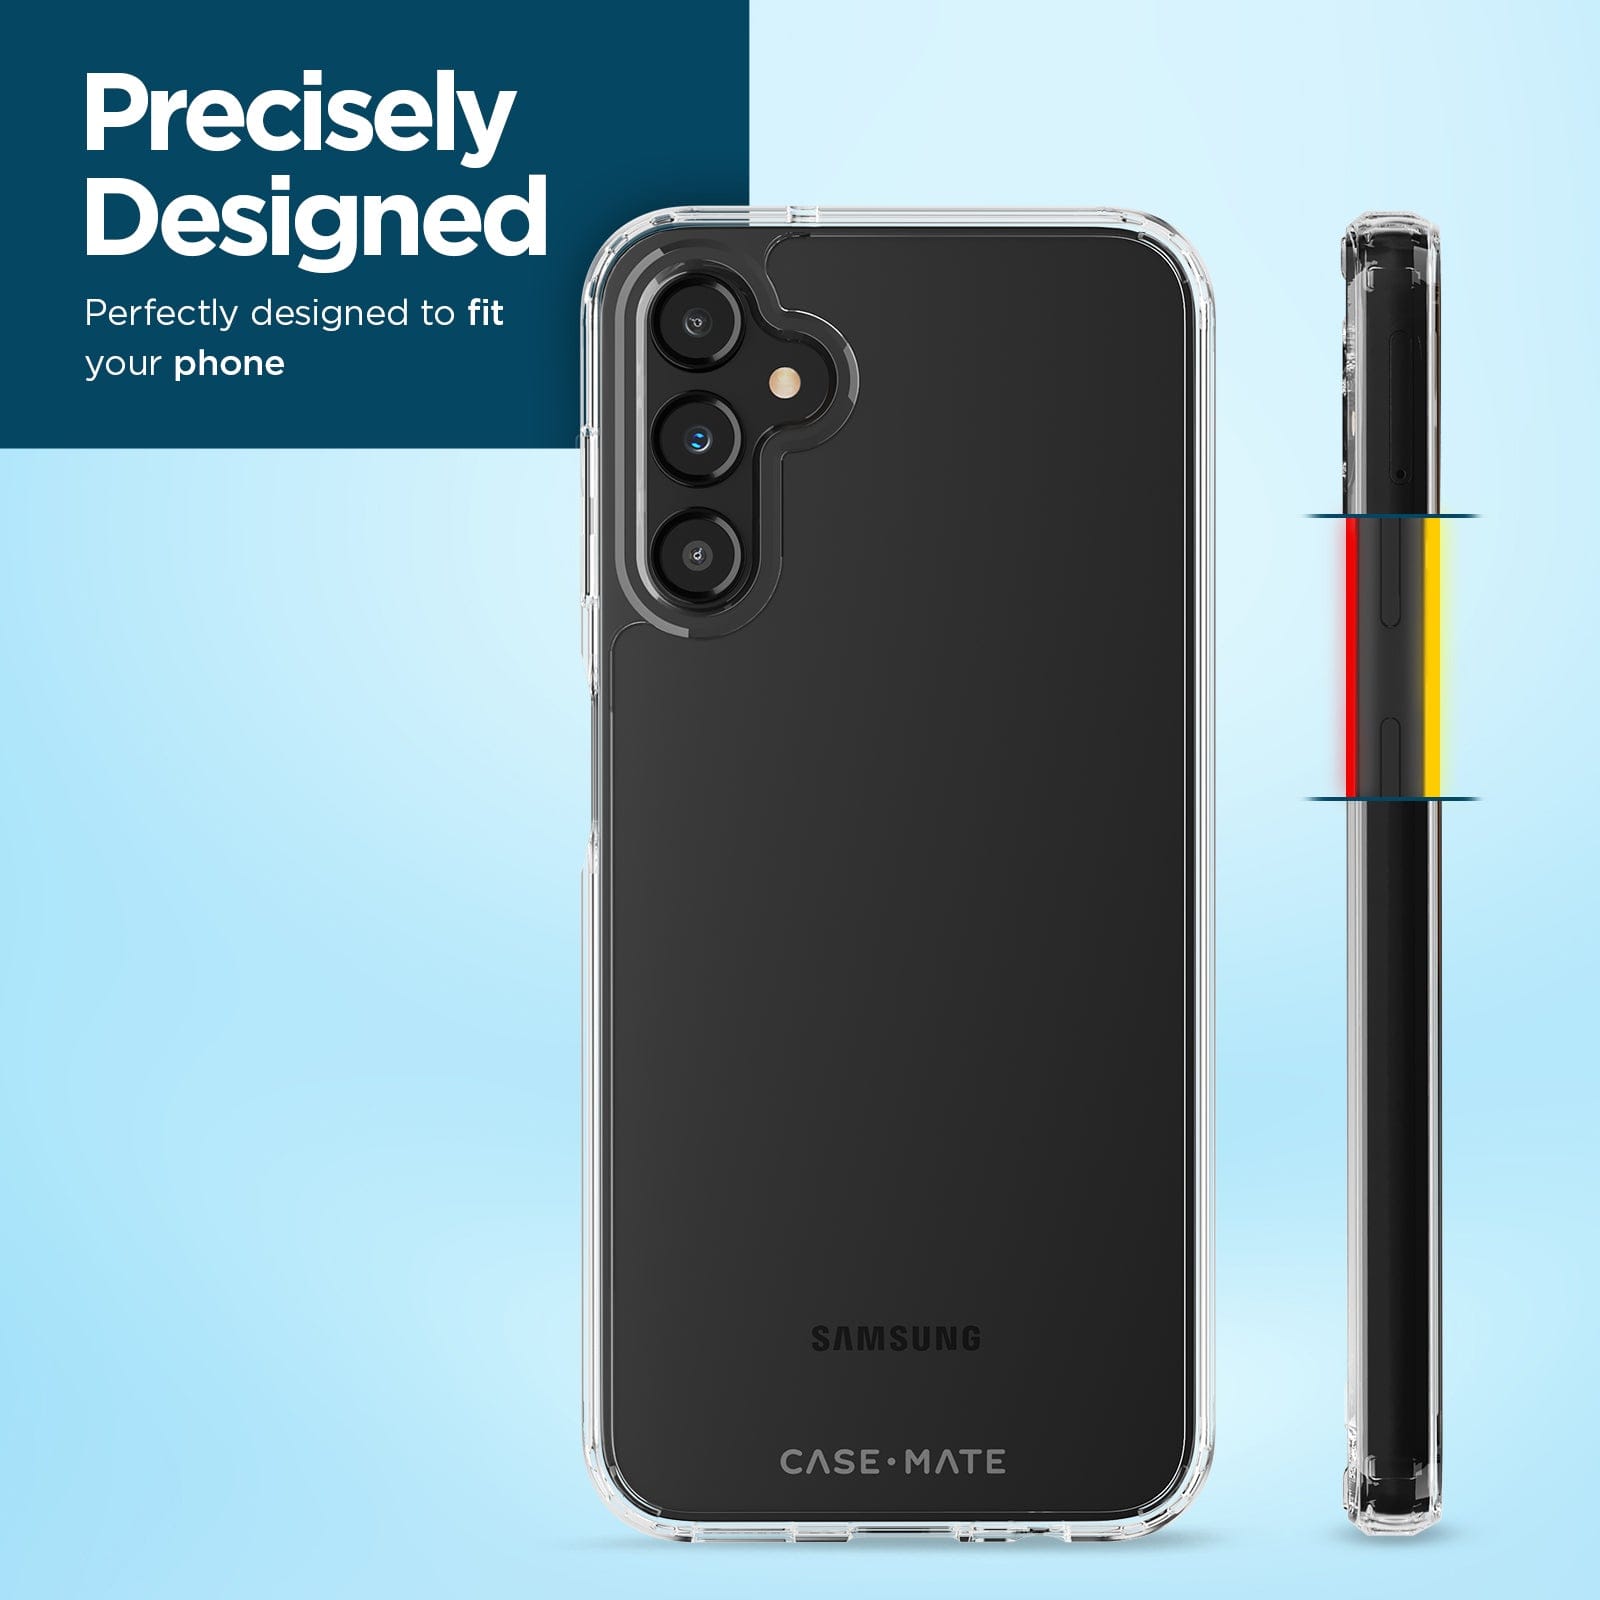 PRECISELY DESIGNED PERFECTLY DESIGNED TO FIT YOUR PHONE 